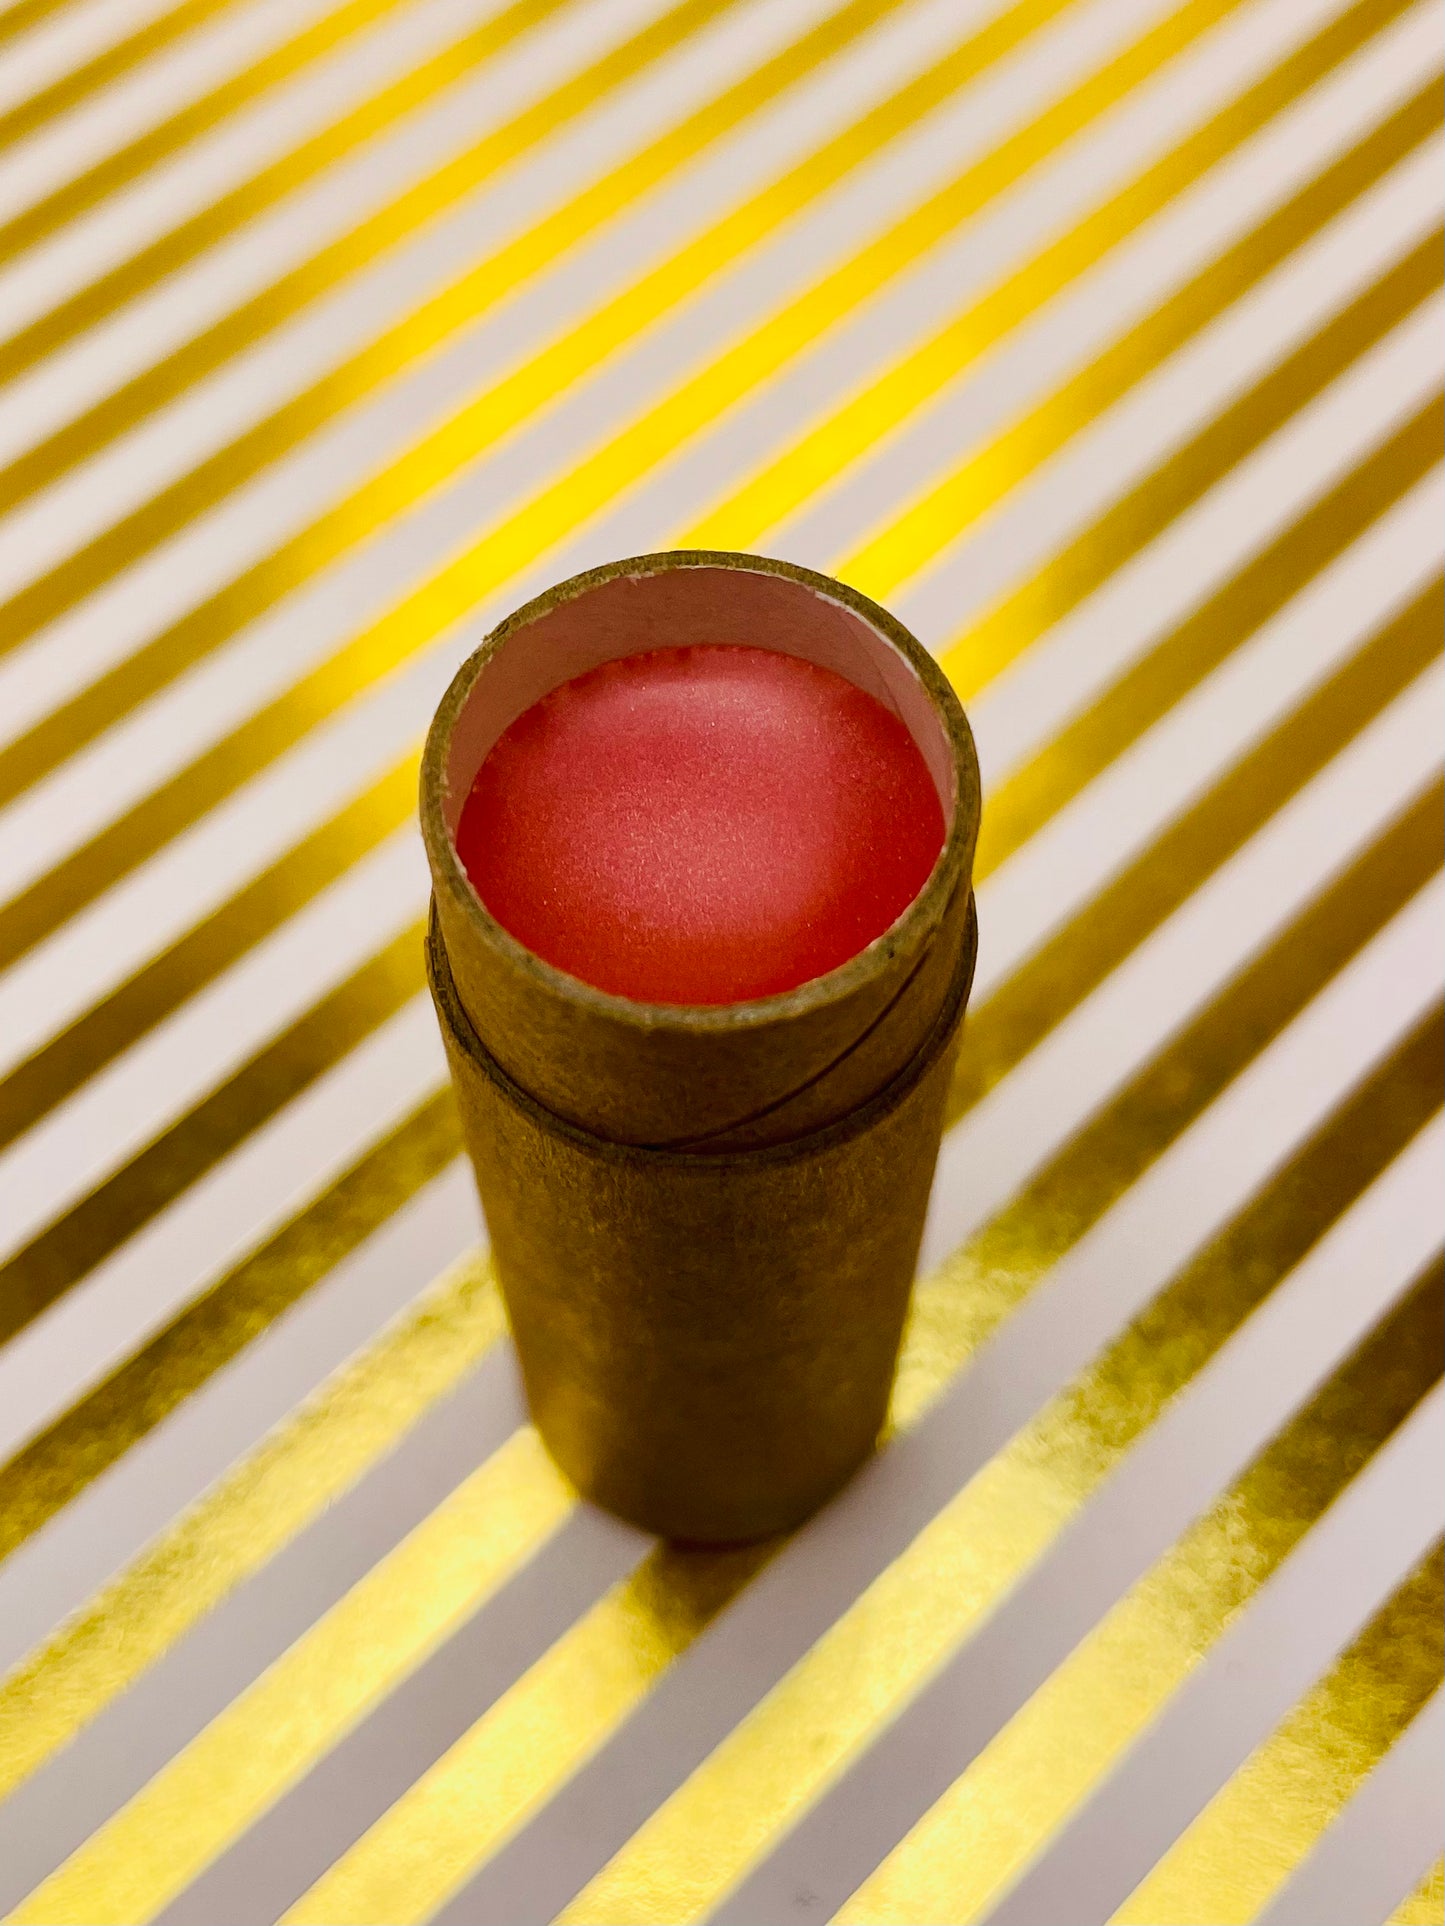 view inside the lip butter tube to show colour of product (light coral pink)